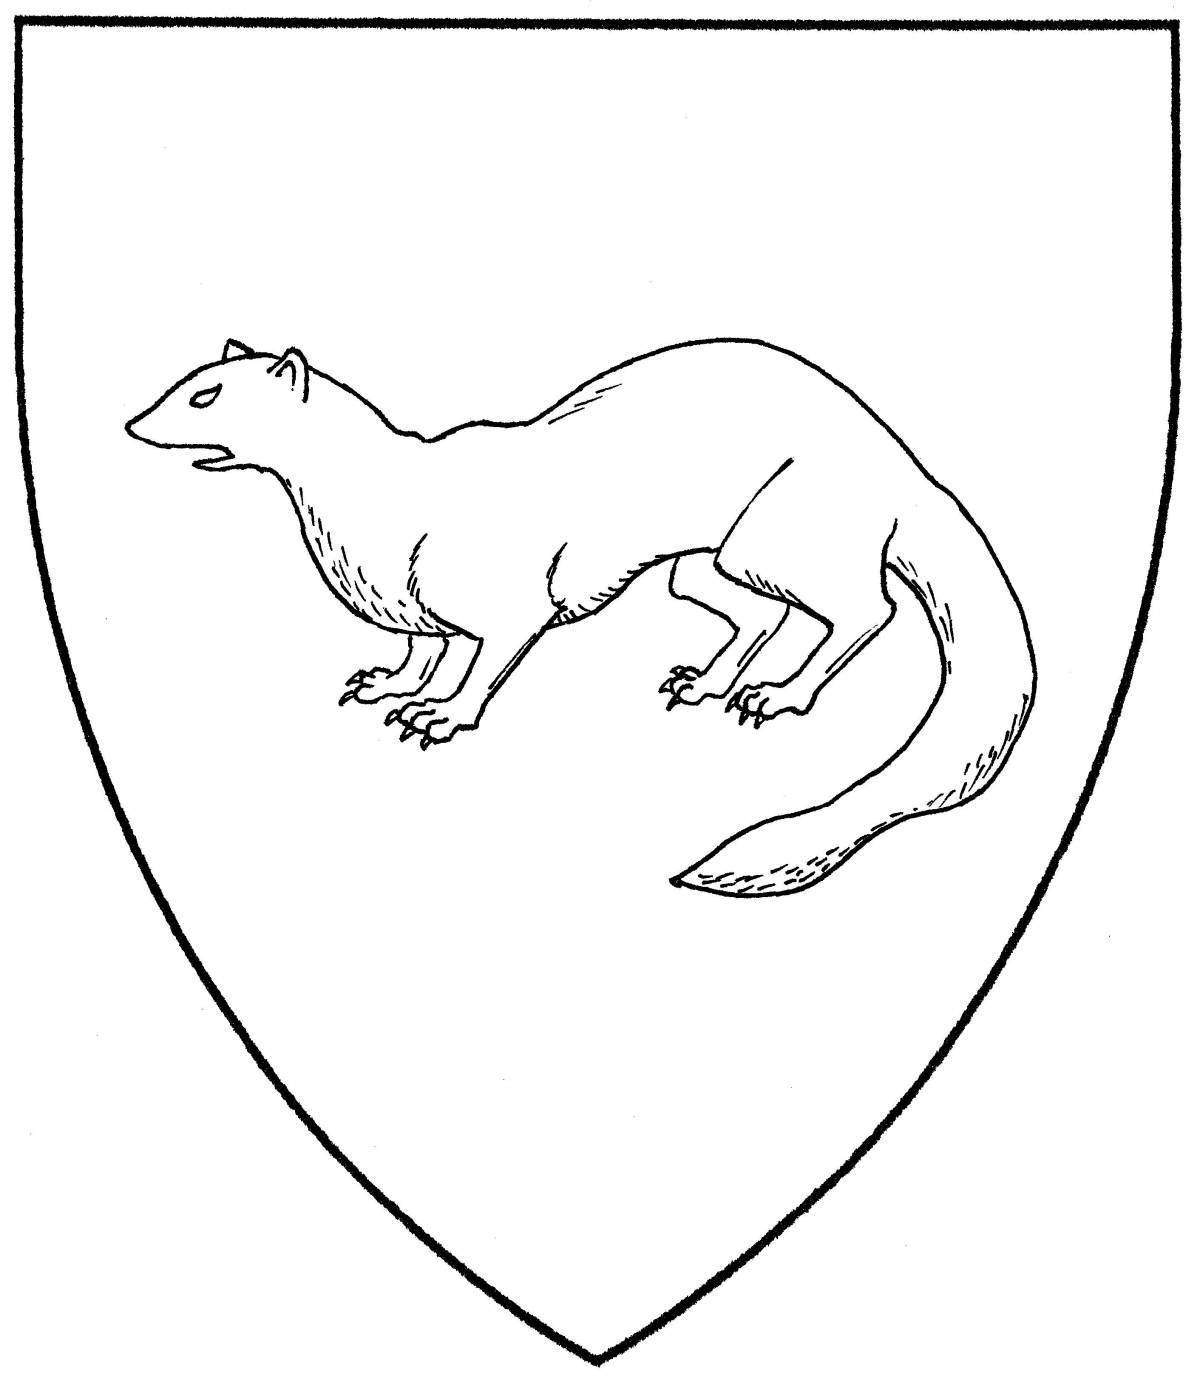 Coloring page magnanimous coat of arms of Ufa